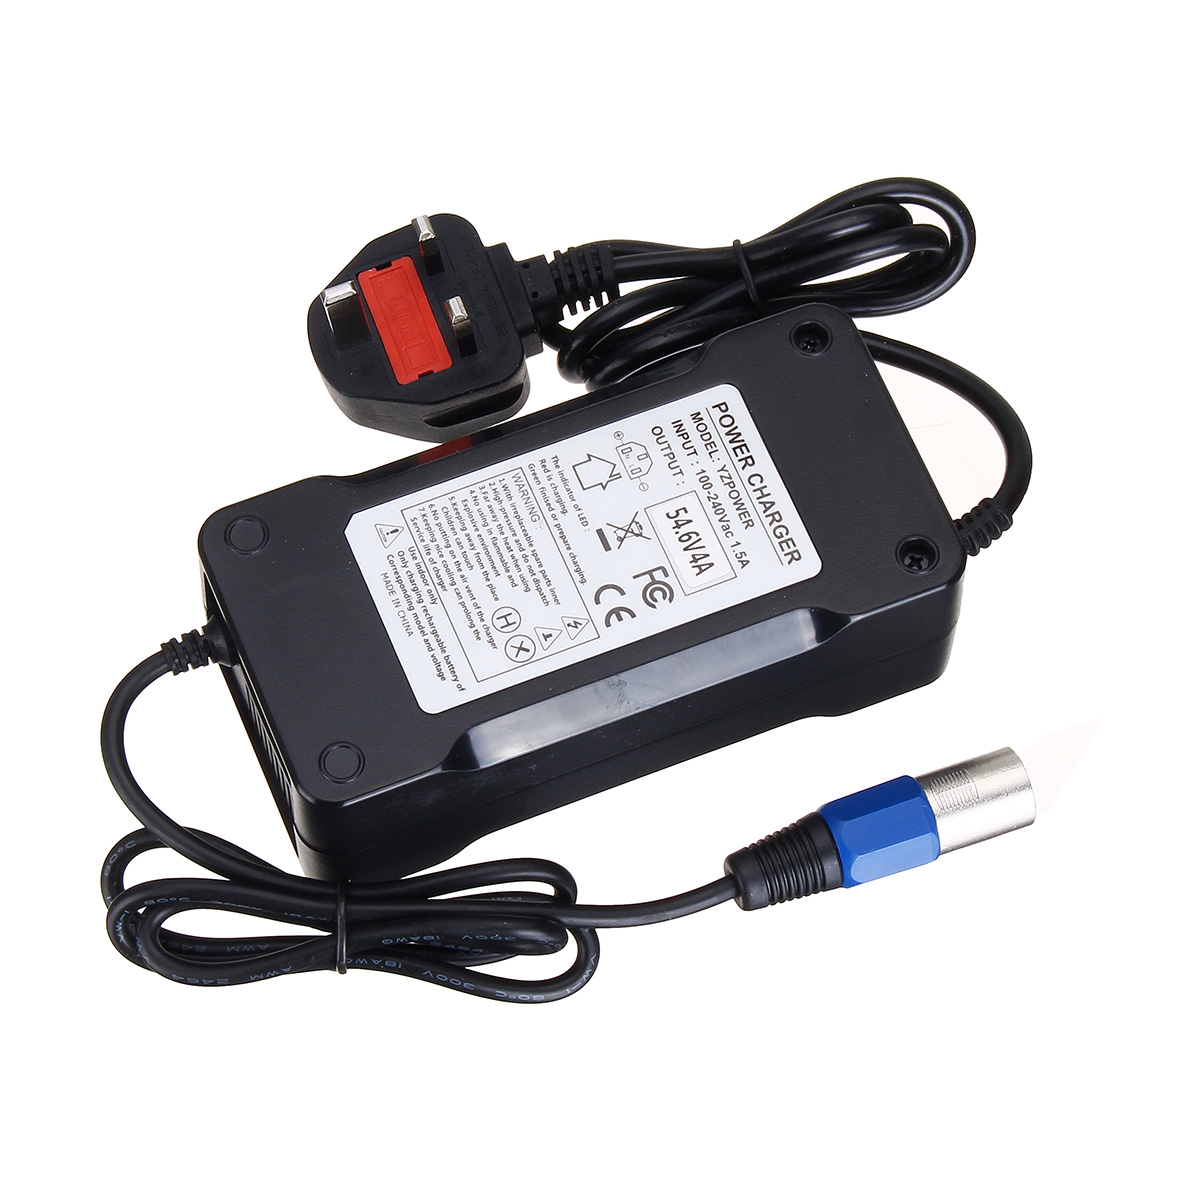 

54.6V 4A Output 48V XLR Plug Battery Charger For Electric Scooter Bicycle E-bike